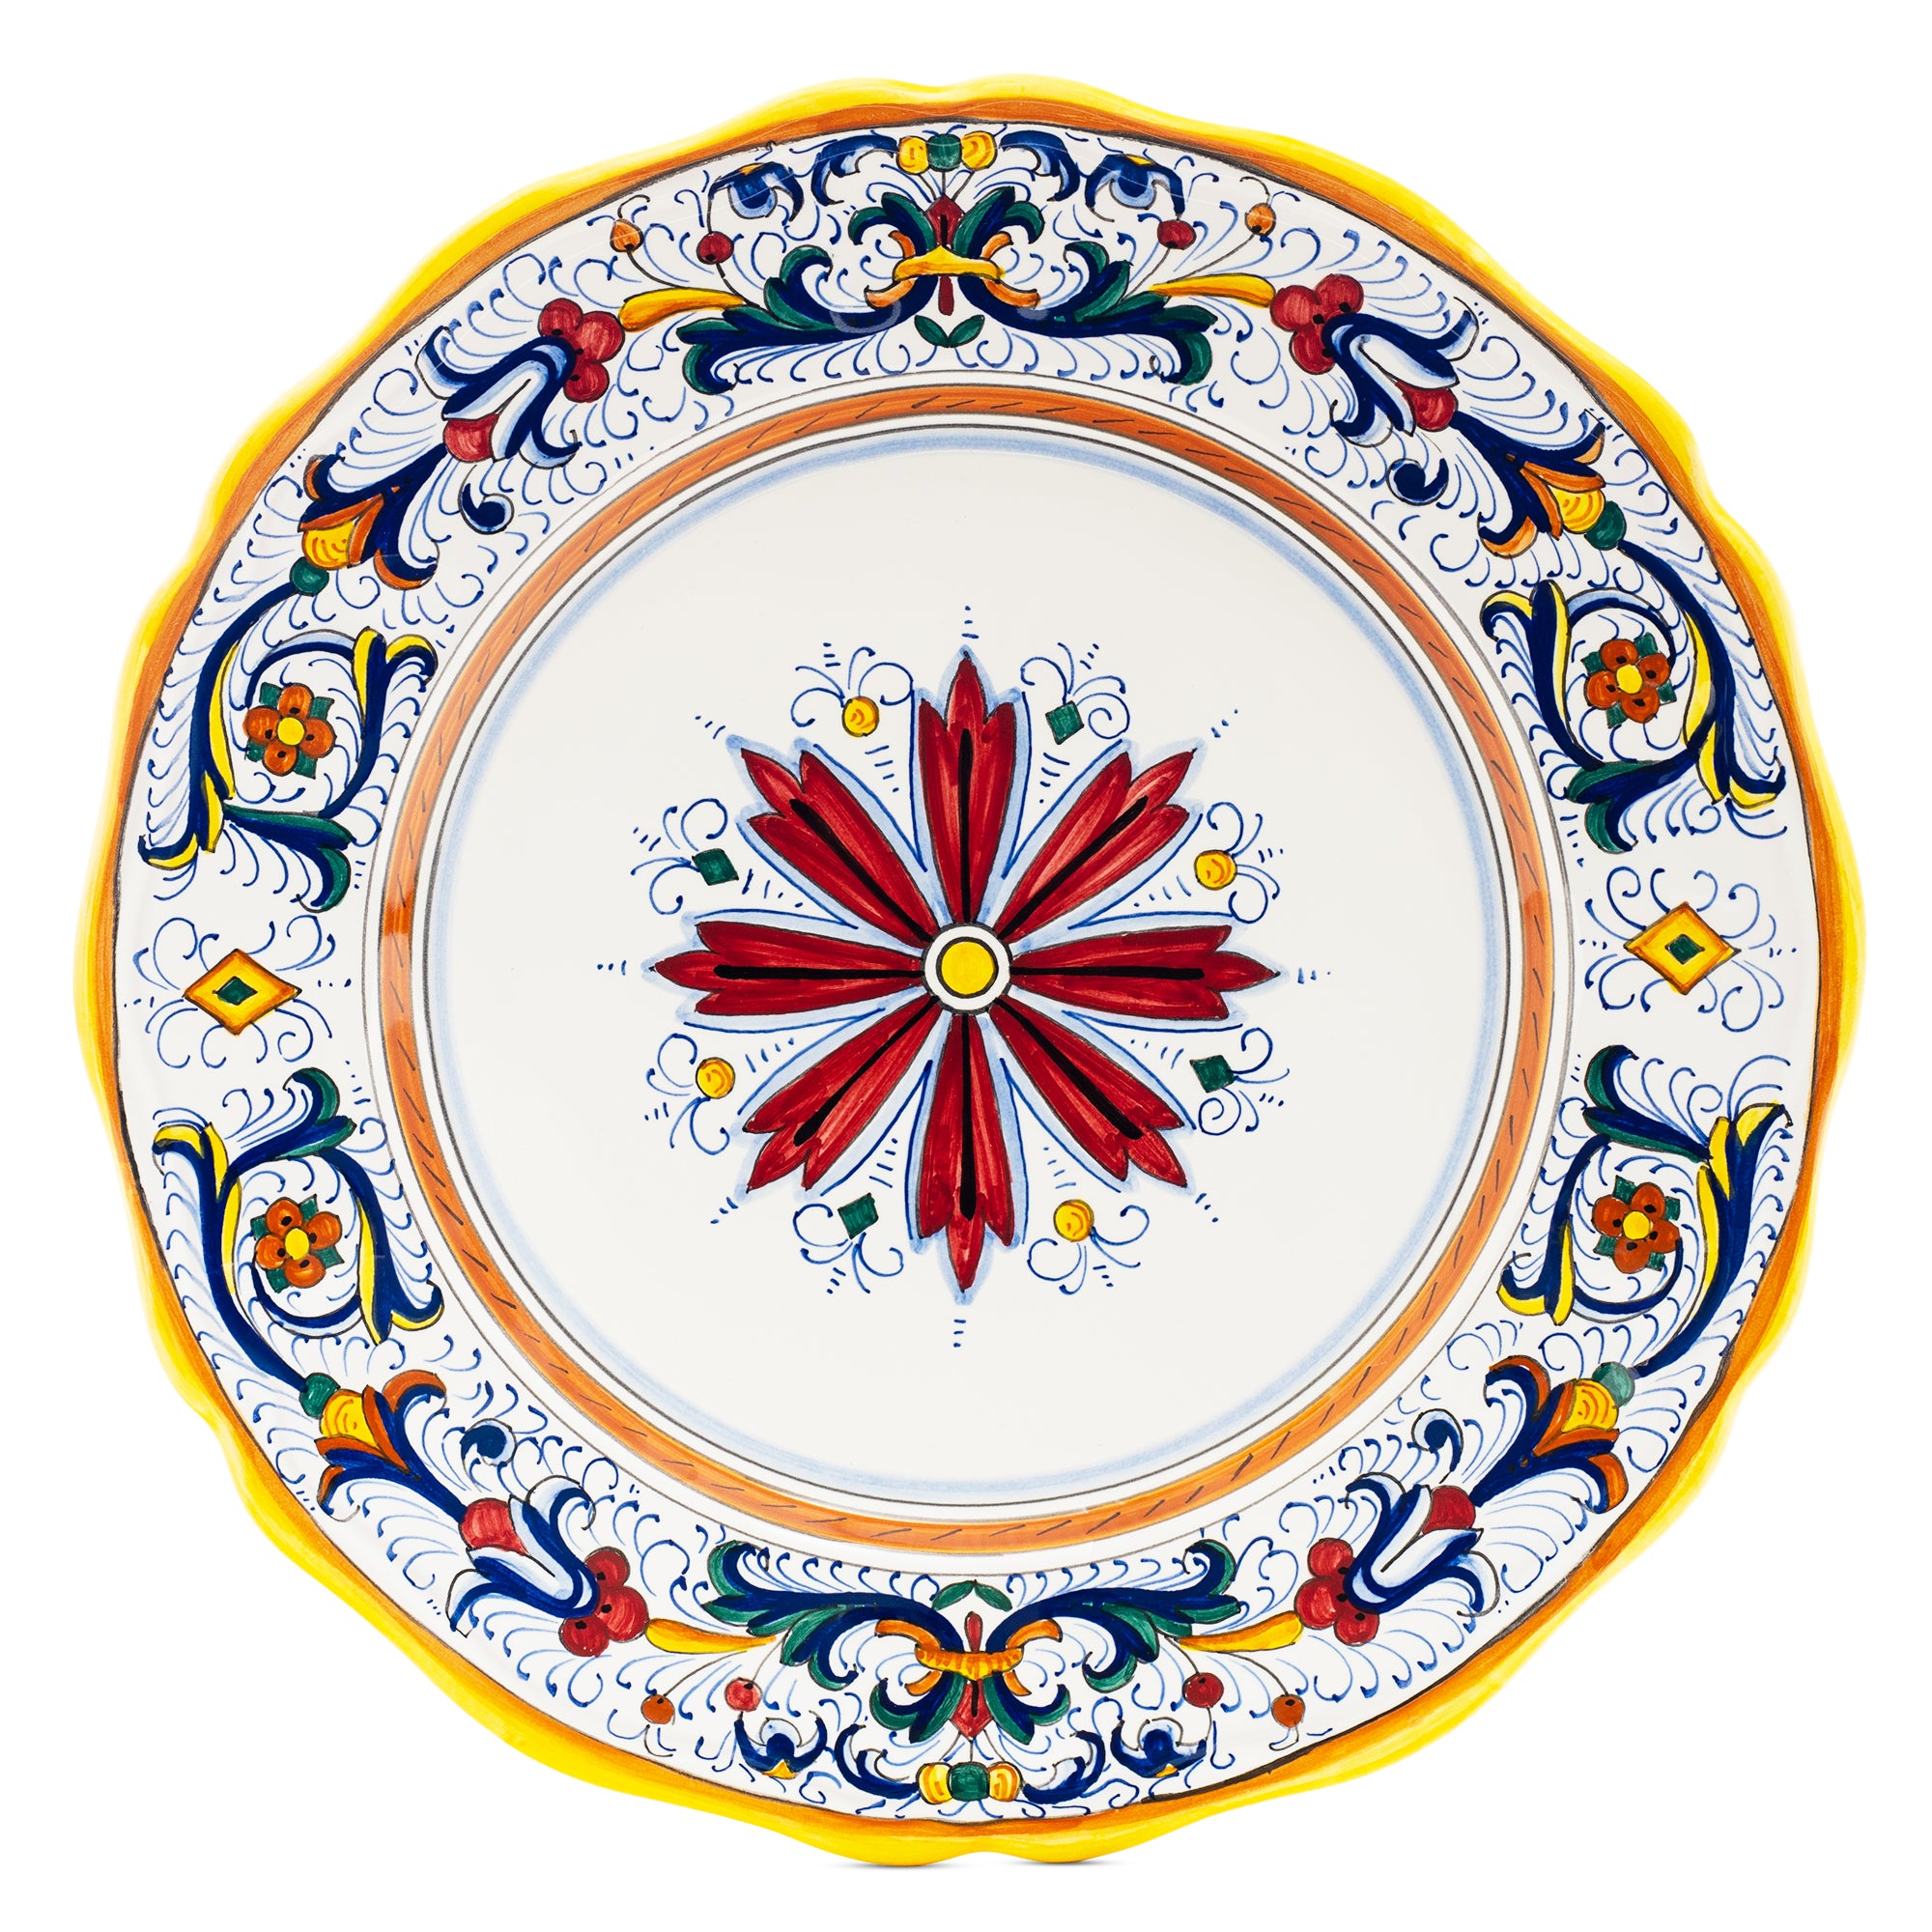 Ricco Deruta Dinner Plate, Full Design - Set of 4, ceramics, pottery, italian design, majolica, handmade, handcrafted, handpainted, home decor, kitchen art, home goods, deruta, majolica, Artisan, treasures, traditional art, modern art, gift ideas, style, SF, shop small business, artists, shop online, landmark store, legacy, one of a kind, limited edition, gift guide, gift shop, retail shop, decorations, shopping, italy, home staging, home decorating, home interiors